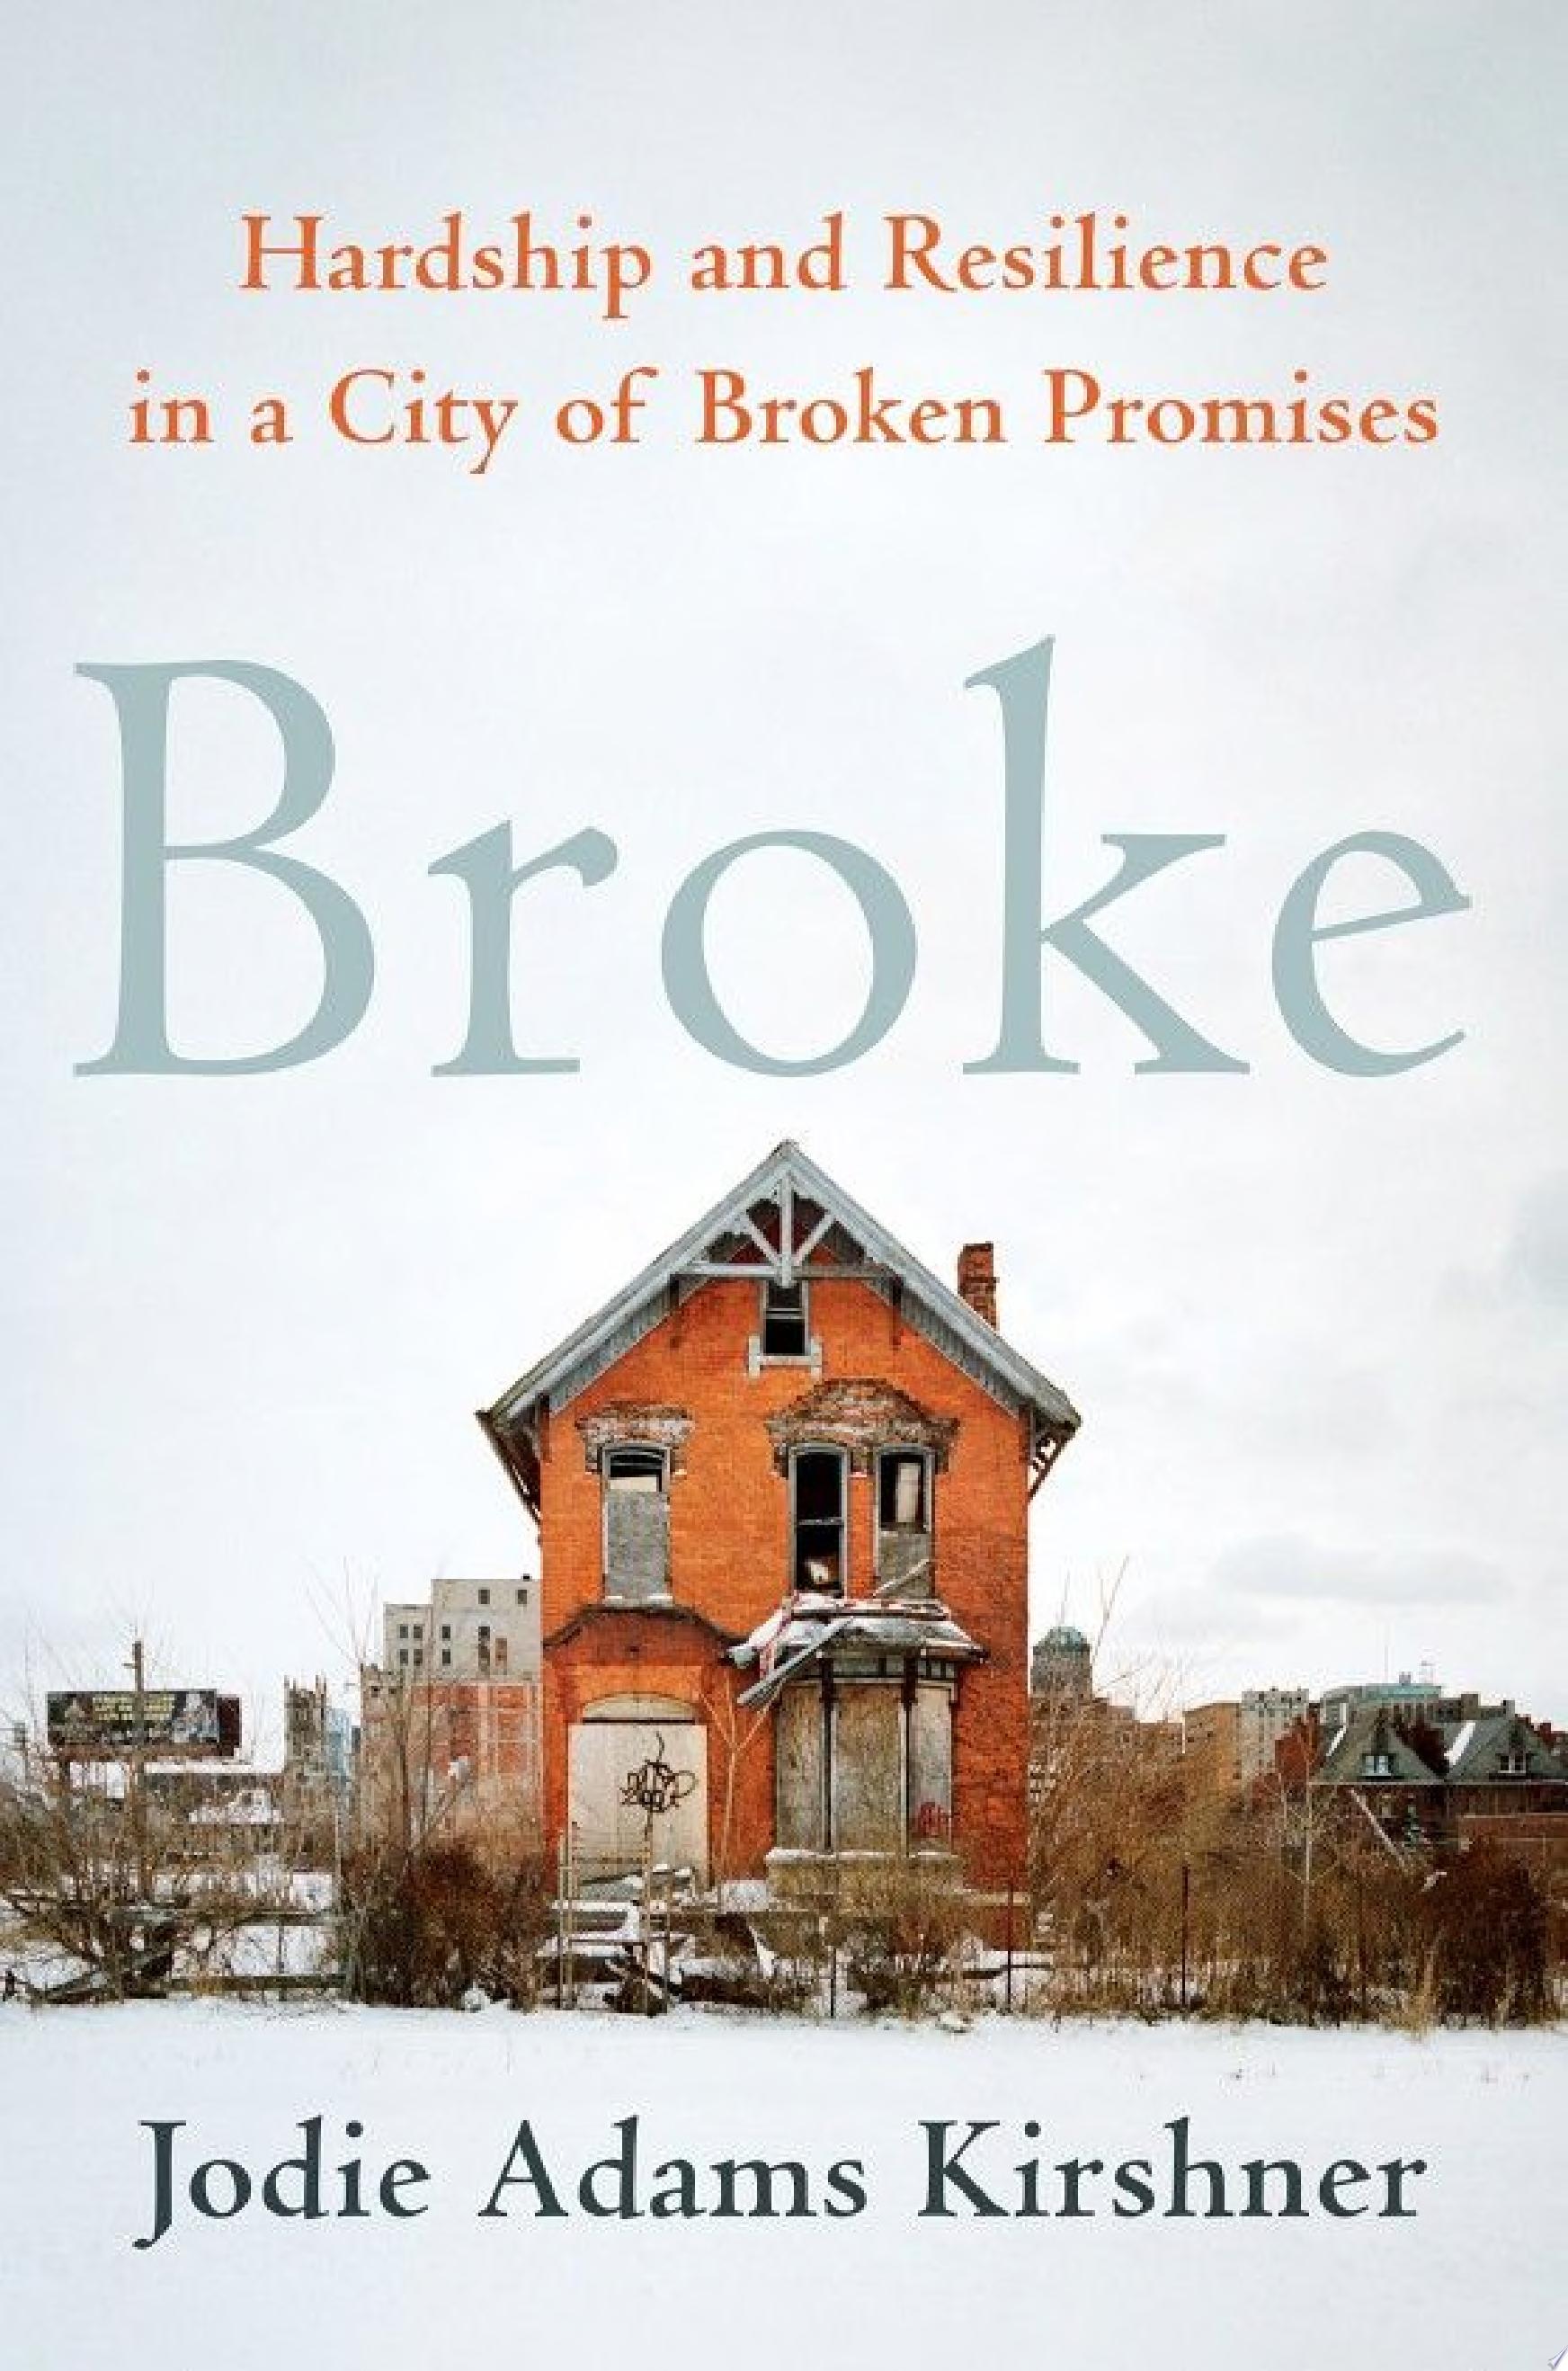 Image for "Broke: Hardship and Resilience in a City of Broken Promises"